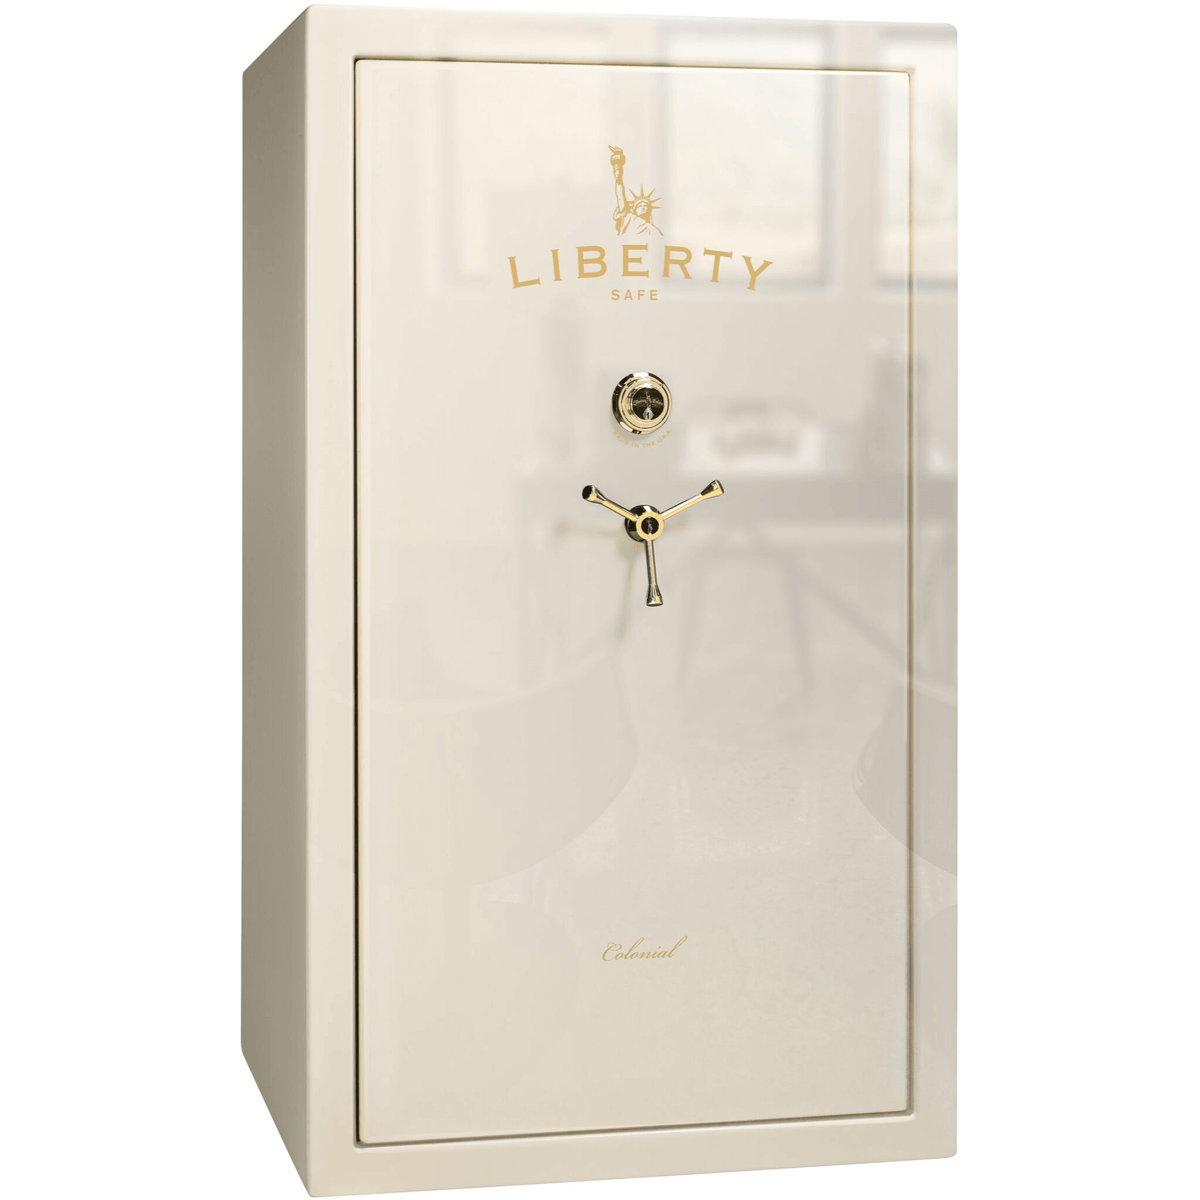 Liberty Colonial 50 Safe in White Gloss with Brass Mechanical Lock.